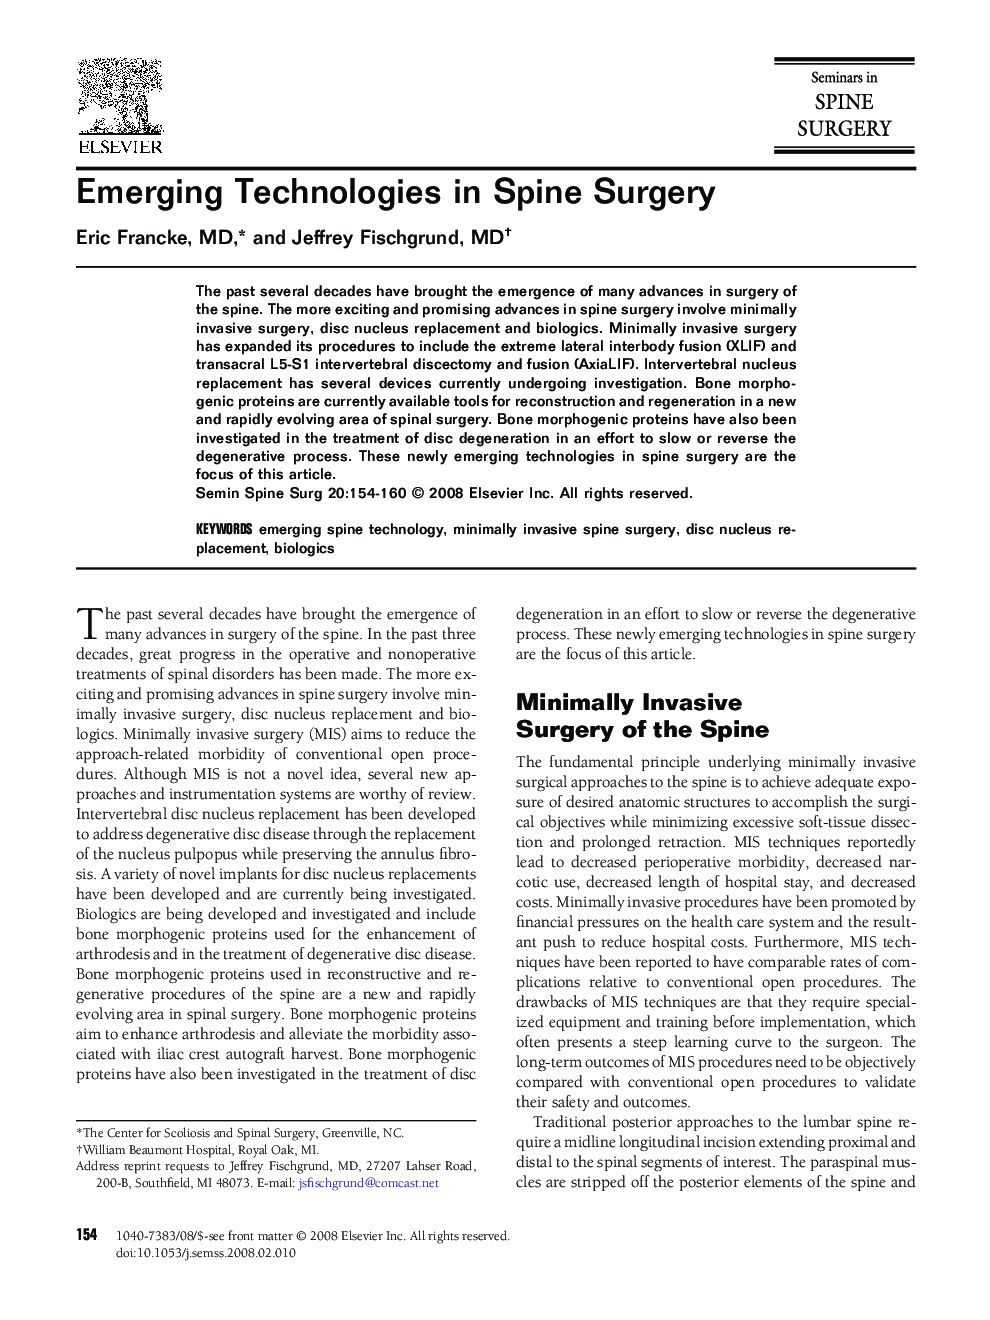 Emerging Technologies in Spine Surgery